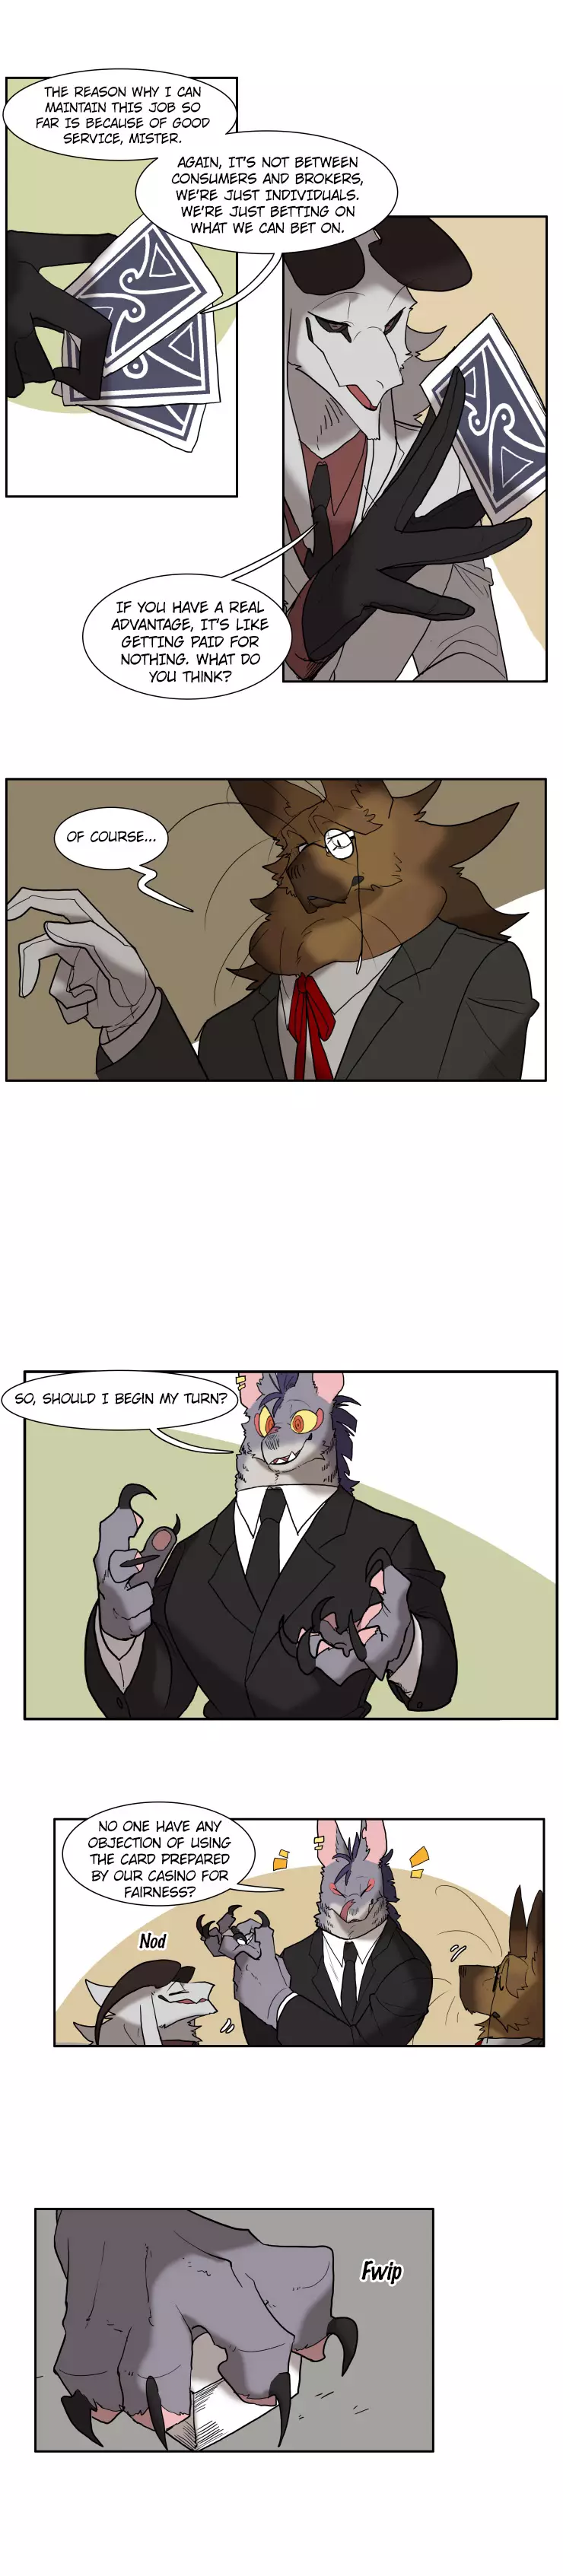 Miss Kitty And Her Bodyguards - 121 page 3-48975793